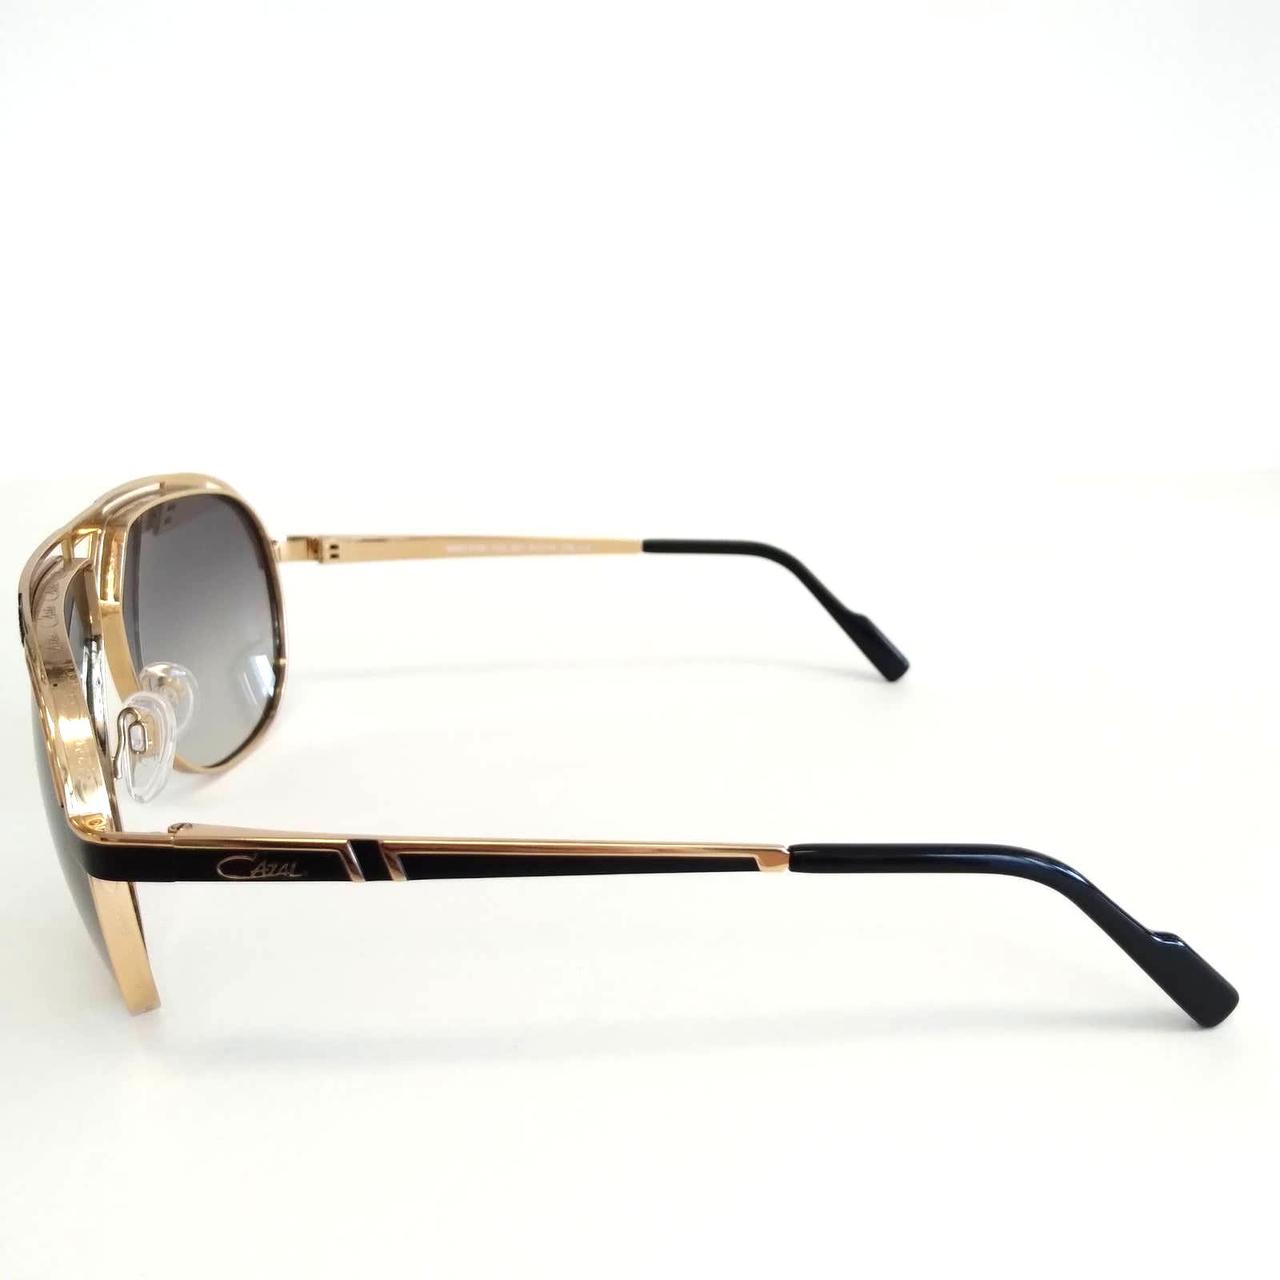 Product Image 4 - Brand: Cazal
Model: 9100
Style: Pilot
Frame/Temple Color: